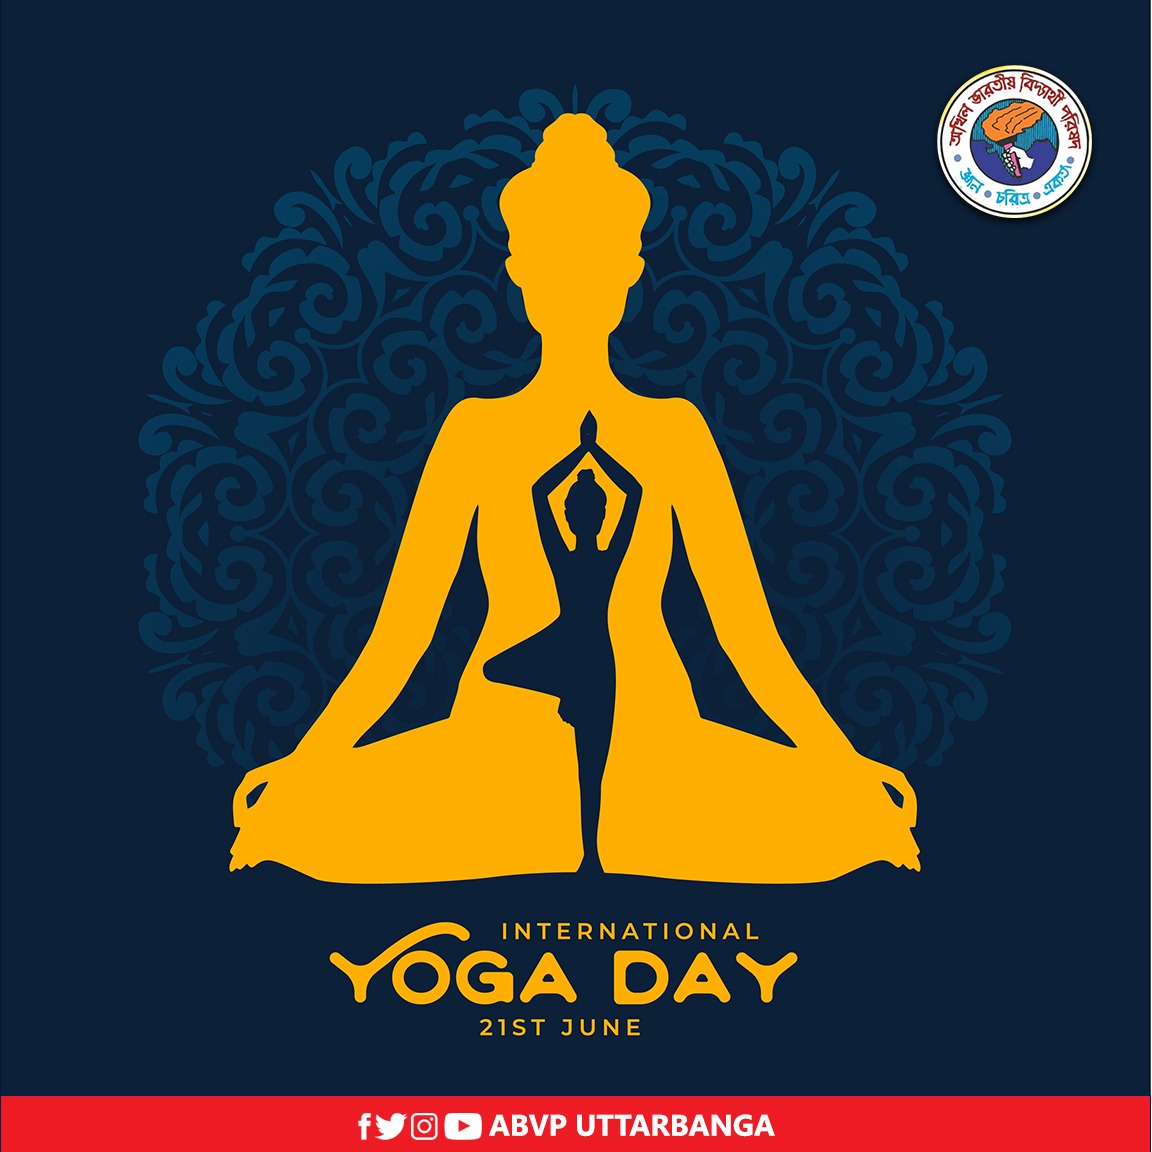 Yoga has been a guiding light for millions of people around the world, offering them a path towards inner peace, harmony, and self-realization. It teaches us to find balance amidst the chaos of life and empowers us to live with mindfulness and compassion.
#abvpvoice